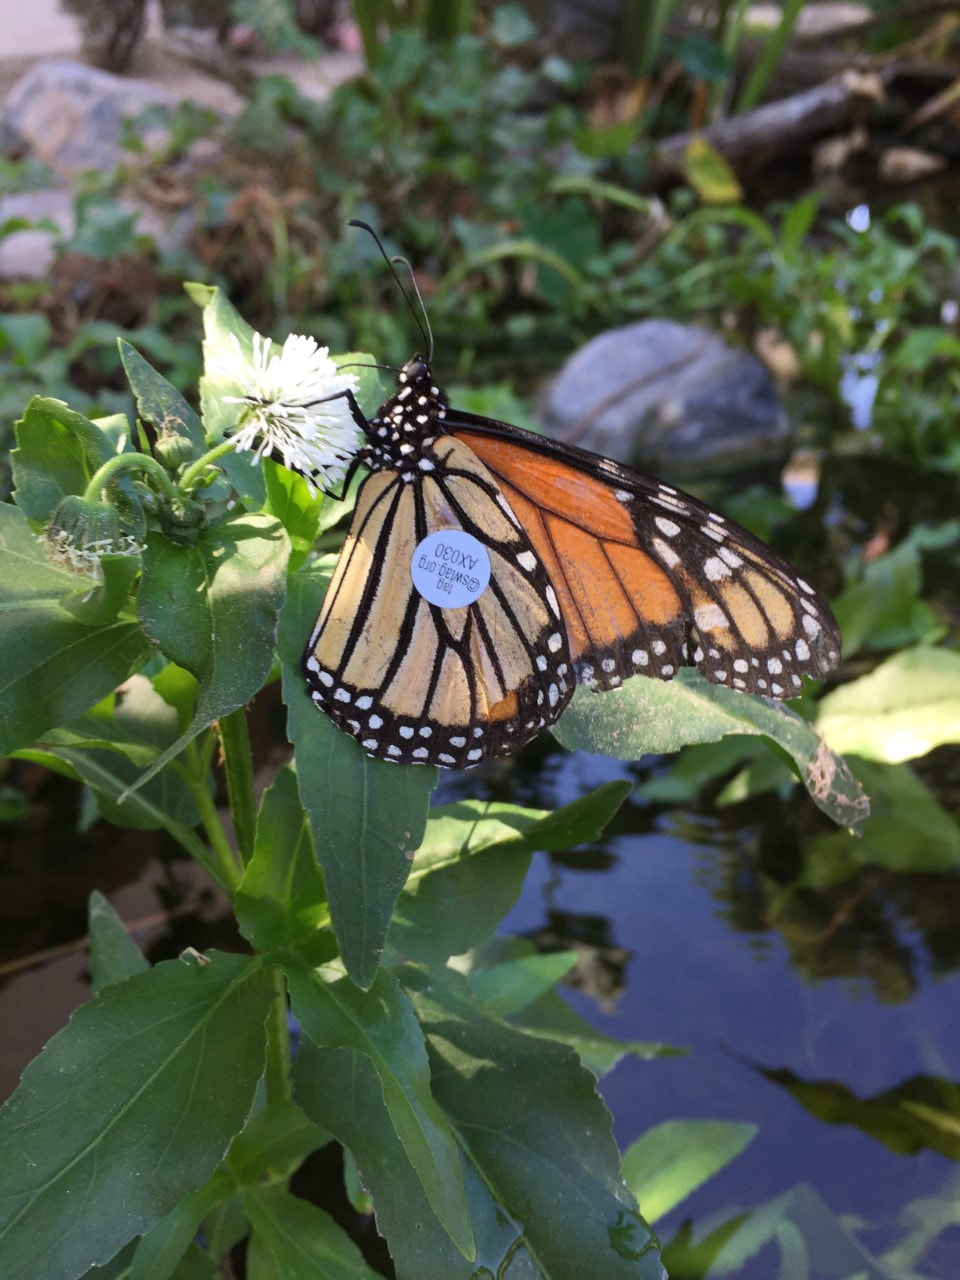 Butterfly next to a pond by The Pond Gnome in Phoenix, AZ